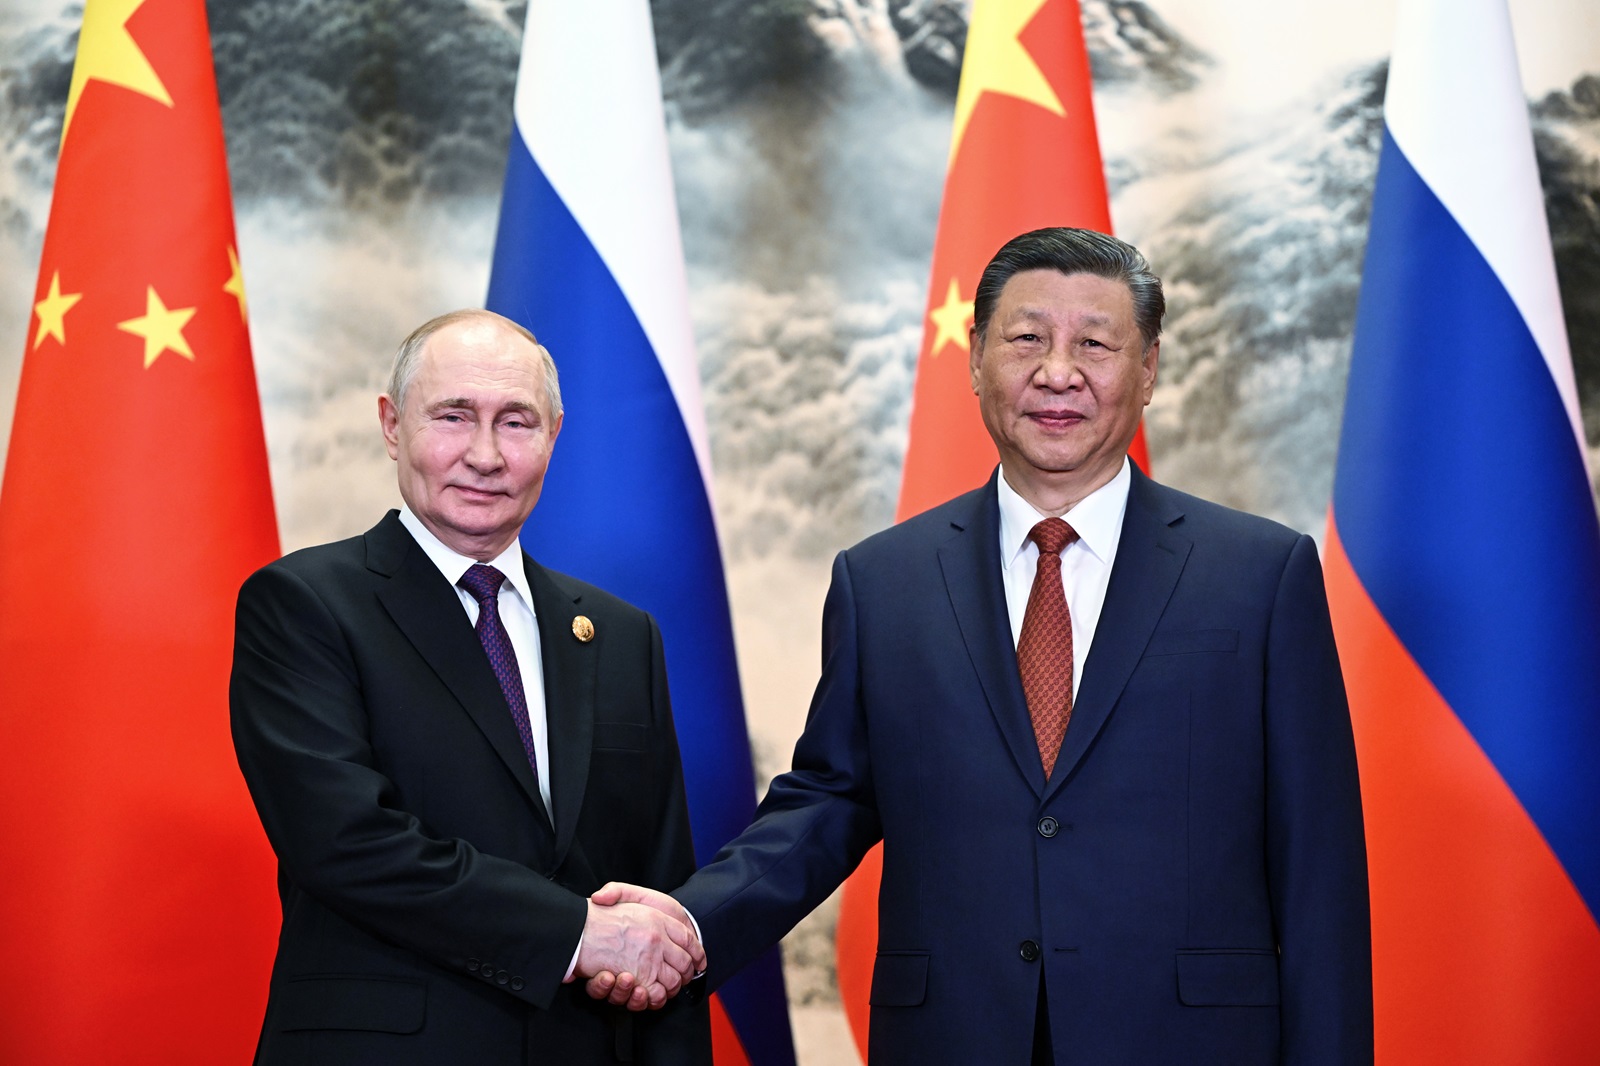 epa11343937 Russian President Vladimir Putin (L) and Chinese President Xi Jinping shake hands as they pose for photos before a meeting in narrow format at the Great Hall of the People in Beijing, China, 16 May 2024. The Russian president is on an official visit to China on 16 and 17 May.  EPA/SERGEY GUNEEV / SPUTNIK / KREMLIN POOL MANDATORY CREDIT